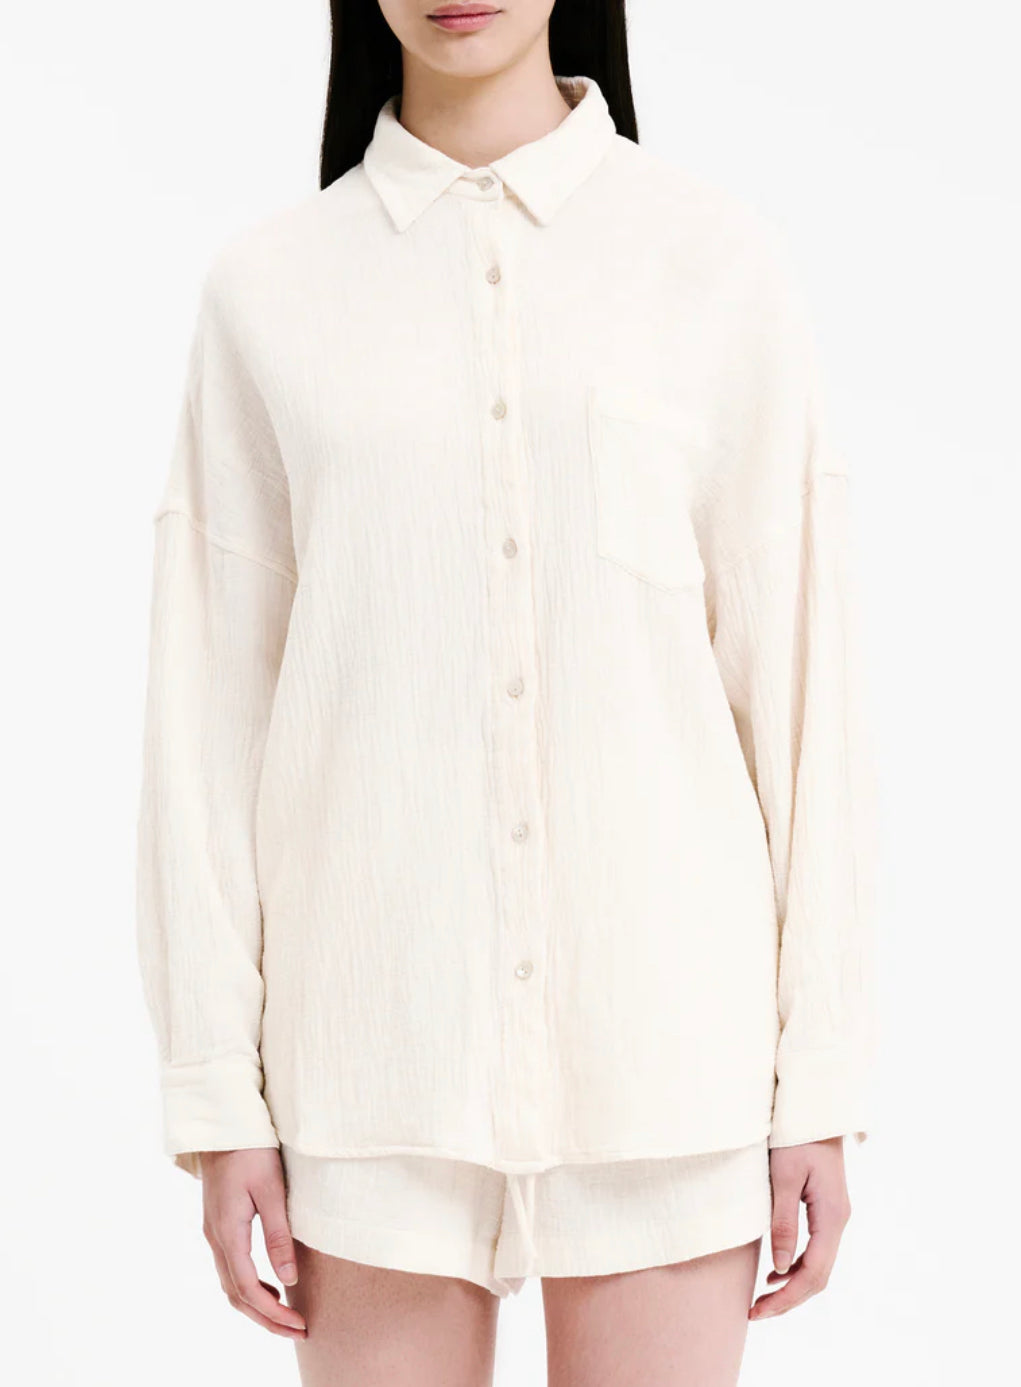 Nude Lucy The Solis Shirt - Cloud